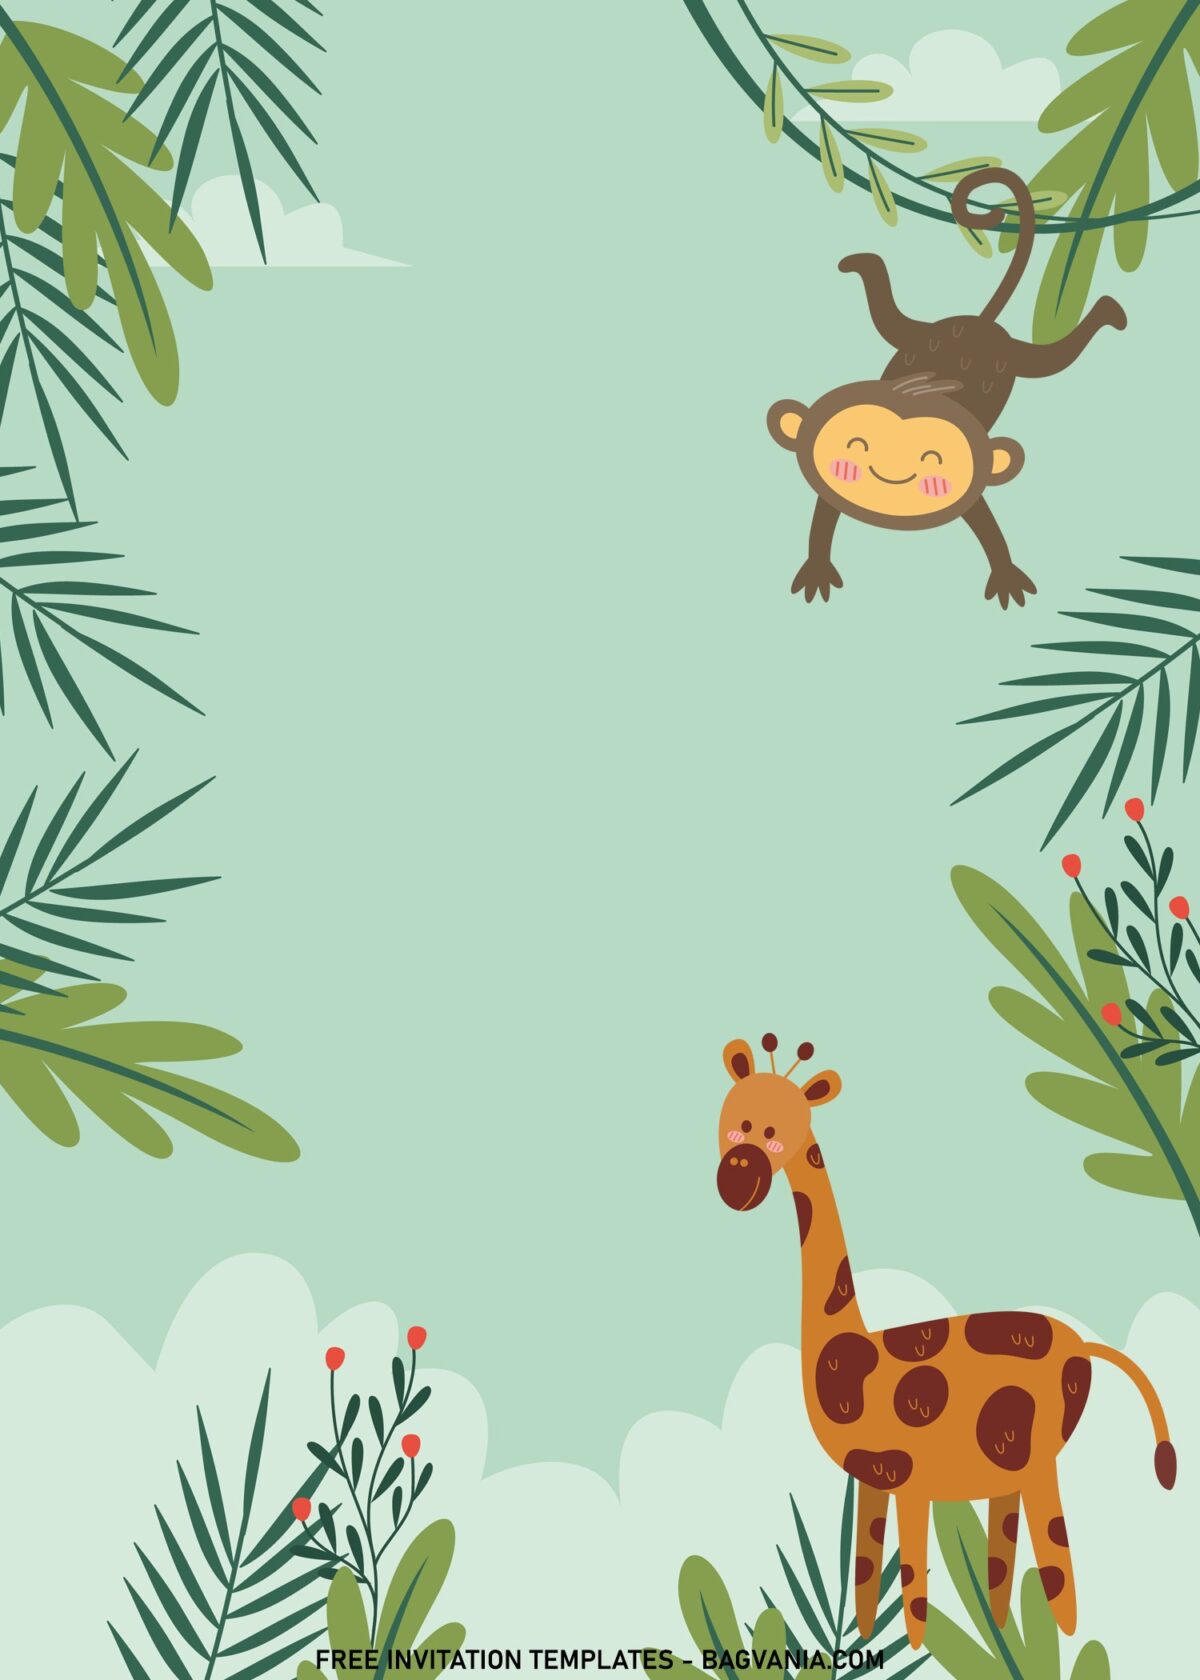 11+ Cute Safari Baby Animals Birthday Invitation Templates For Your Little Explorer with monkey